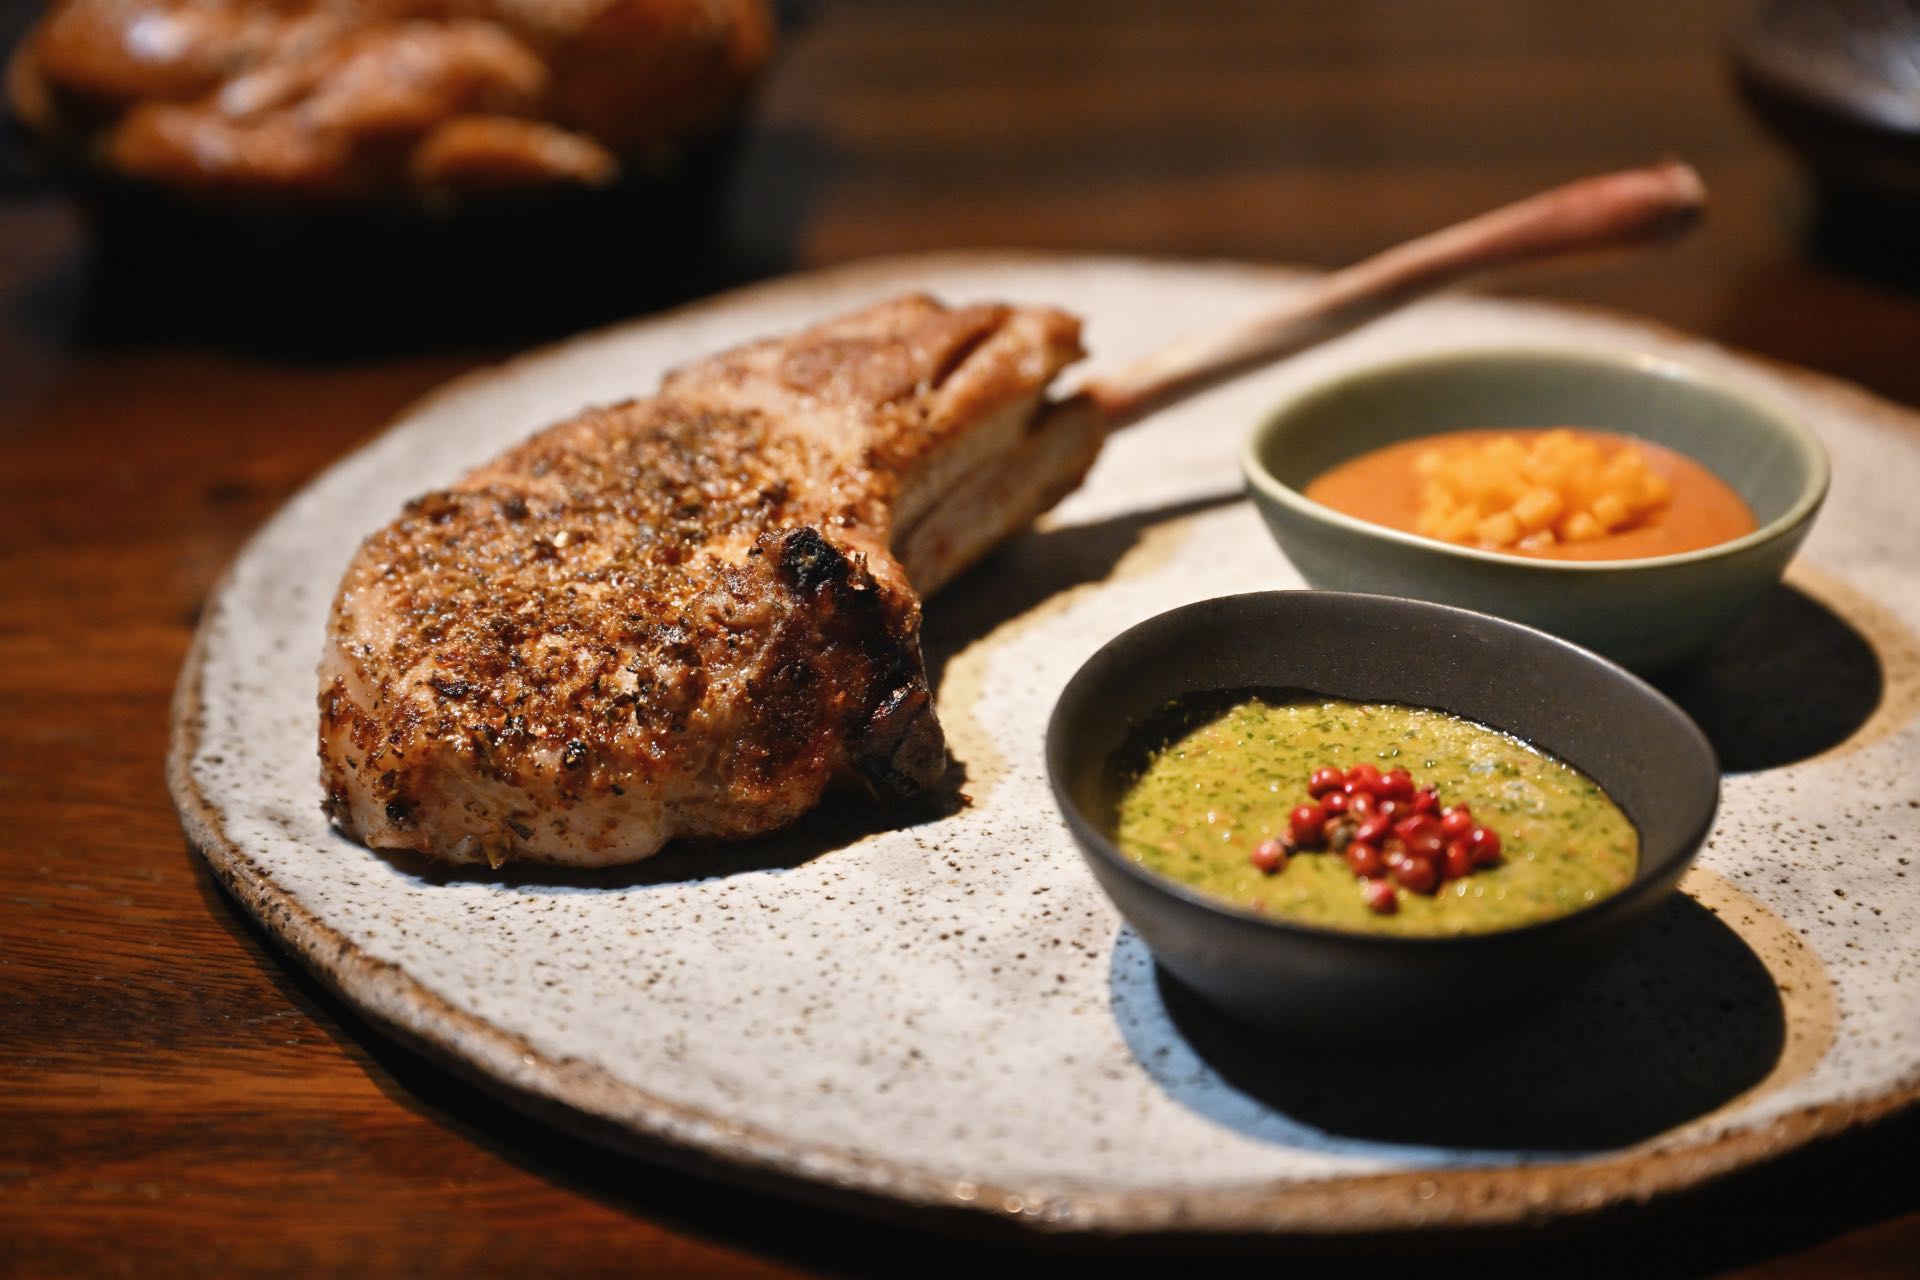 , Dine on traditional Arabian cuisine with a contemporary flair at The Prince